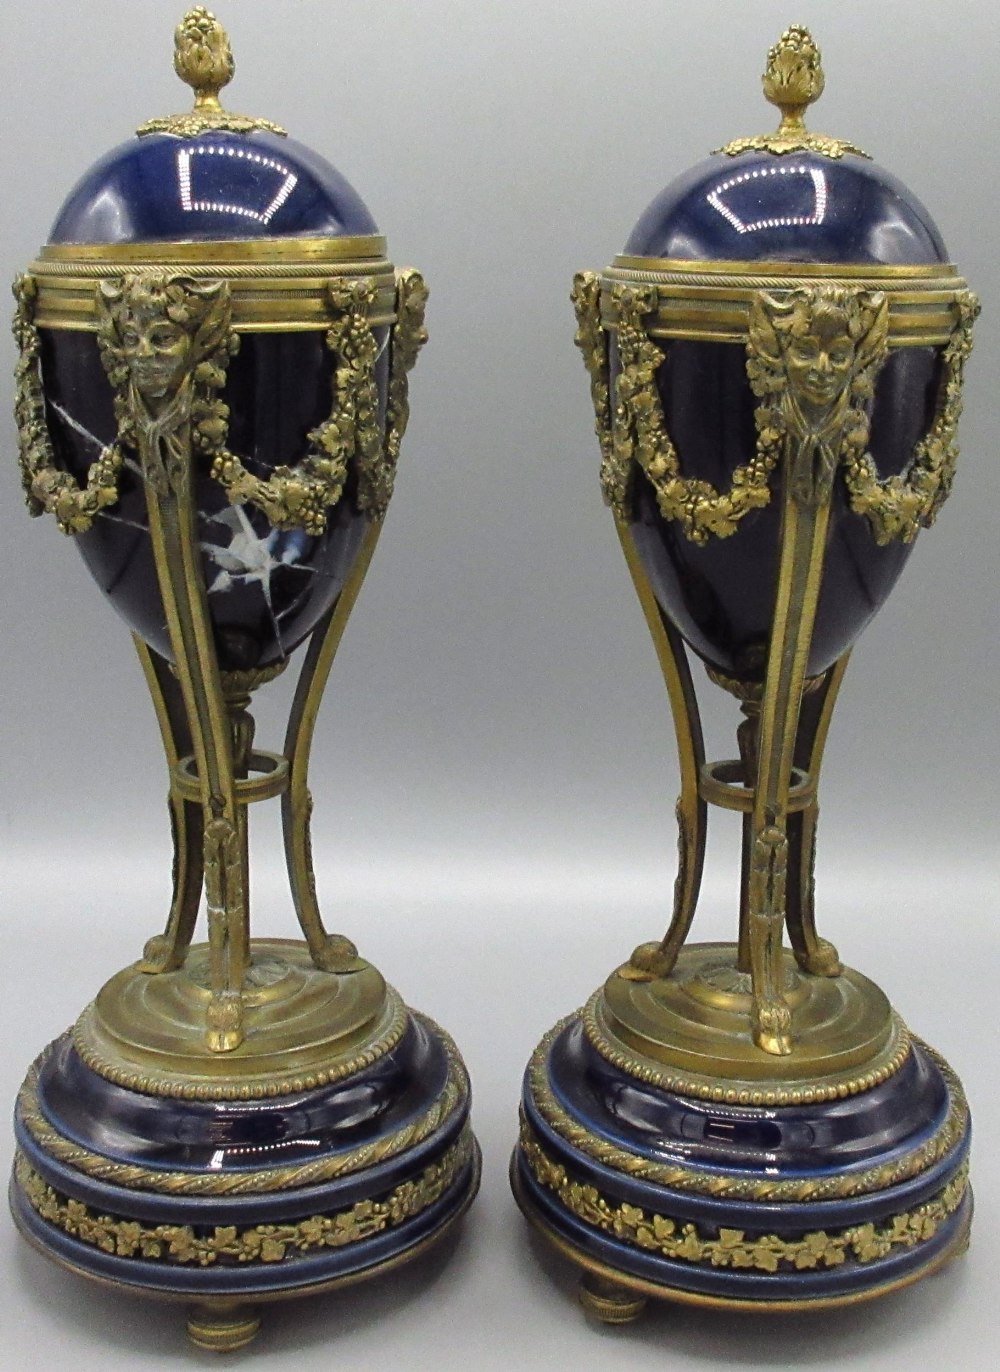 Pair of Louis XVI style ormolu mounted blue porcelain casolettes, egg shaped bodies with - Image 2 of 3